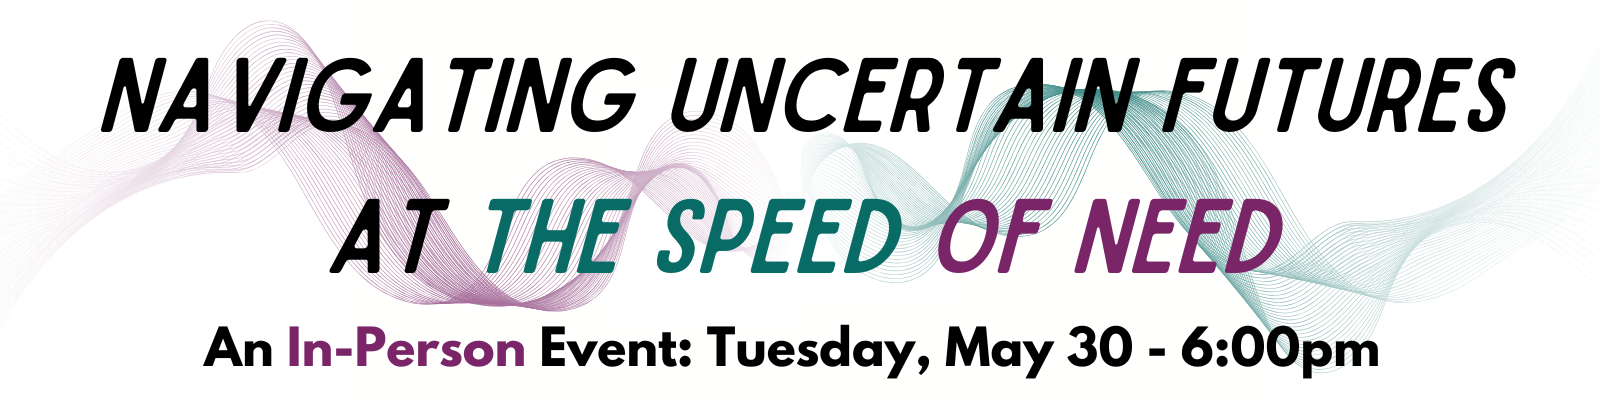 Navigating Uncertain Futures at the Speed of Need - An In-Person Event: Tuesday, May 30 - 6:00pm